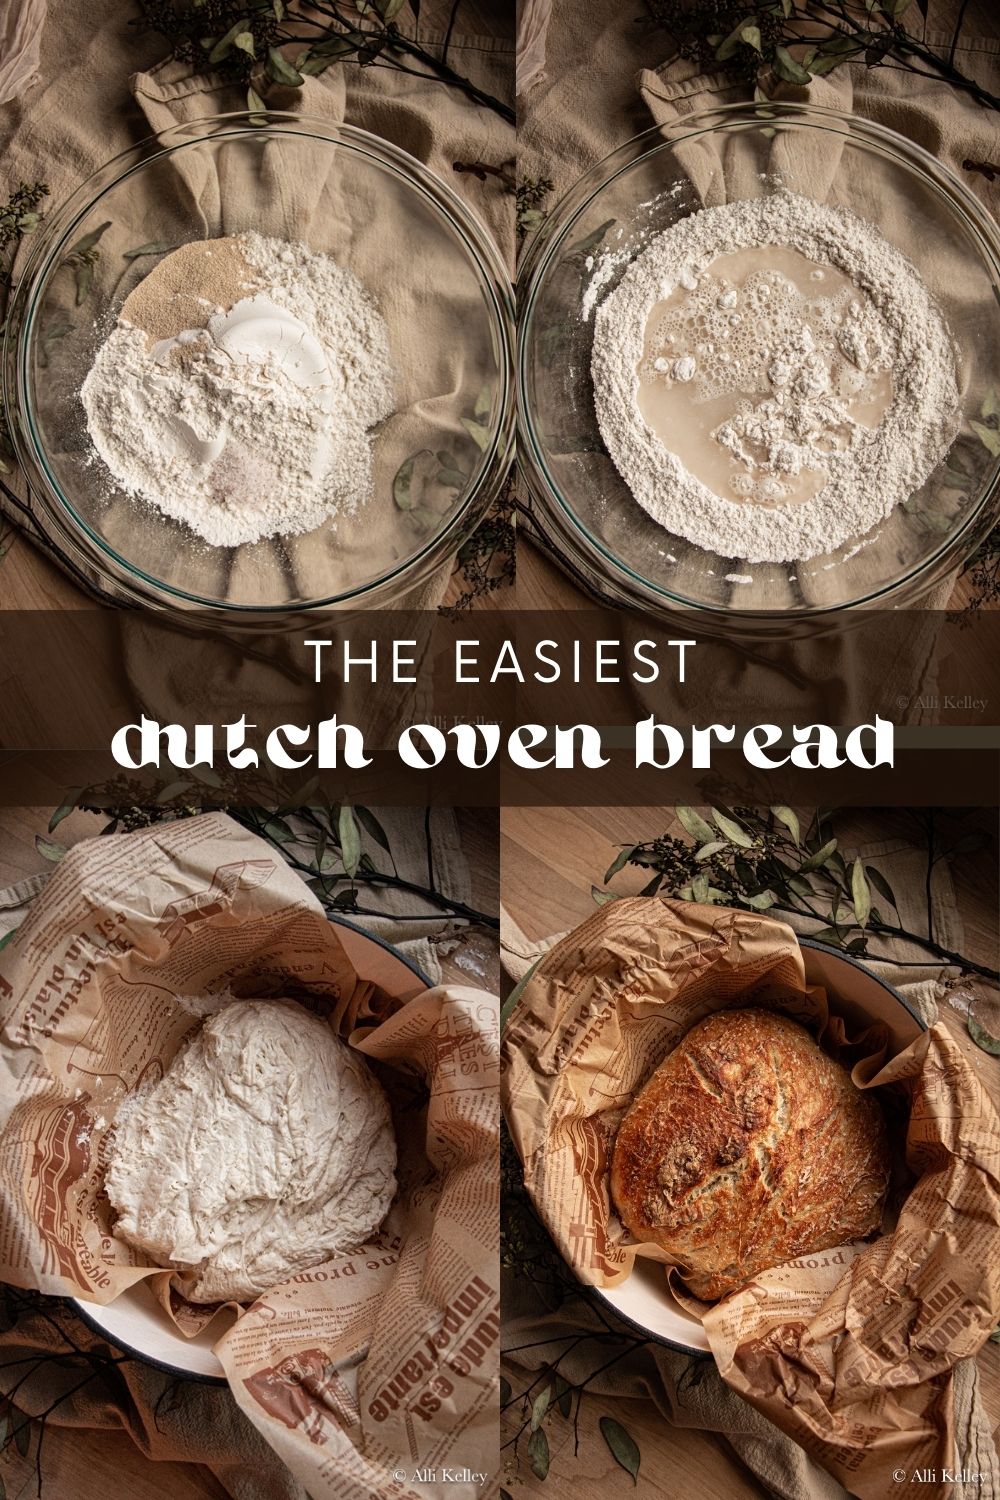 No knead dutch oven bread is so easy to make and turns out perfectly every time, even if you are a beginner. Bake this with coals or in the oven, it's amazing either way! #noknead #breadbaking #dutchoven #castironcooking #castiron #bakingincastiron #dutchovenbread #nokneadbread #dutchovenbreadeasy #dutchovenbreadrecipe